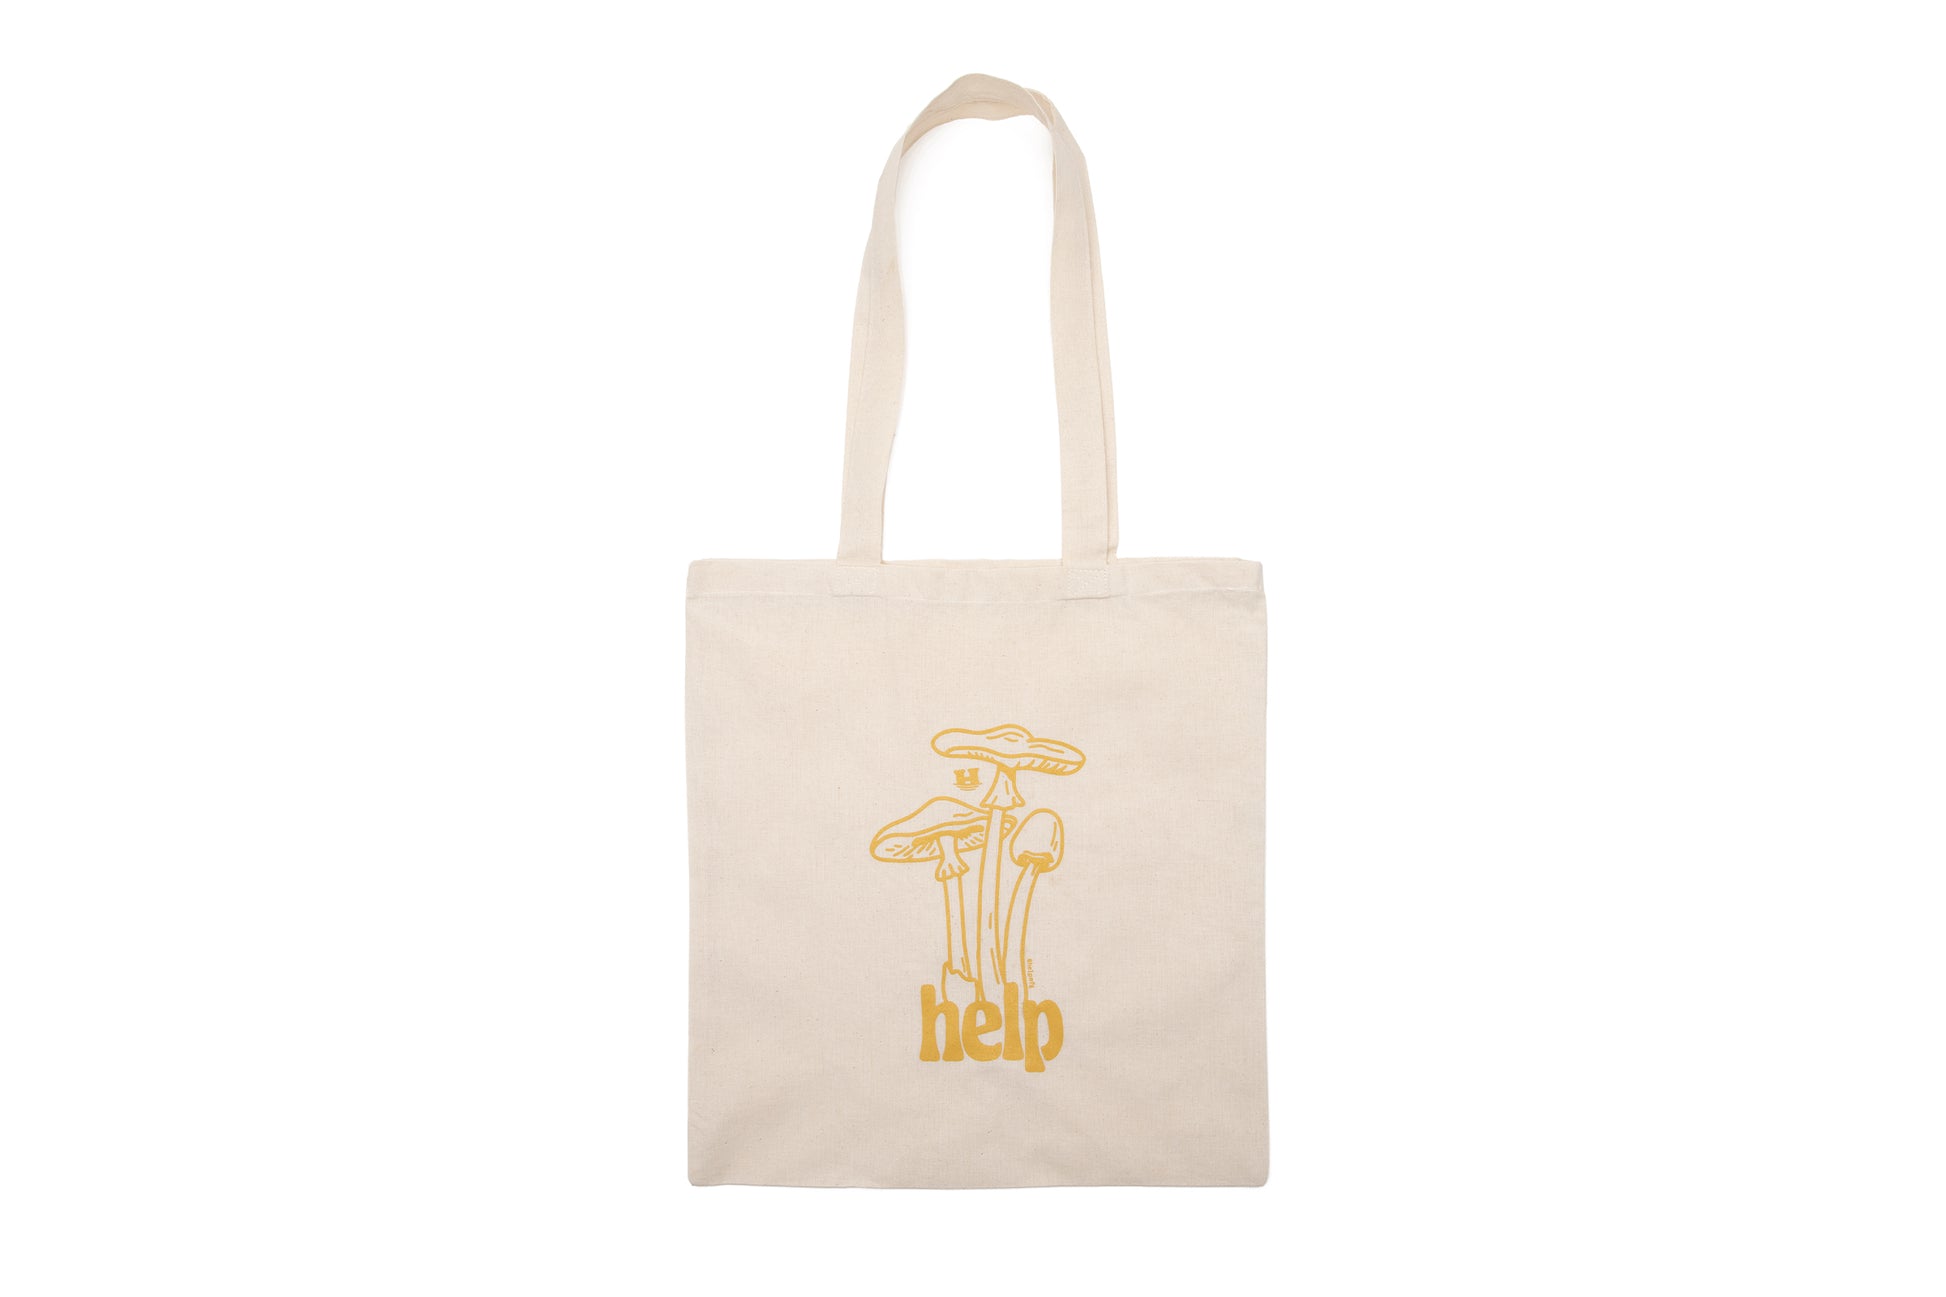 Canvas tote bag with a graphic of mushrooms sprouting out of the word "Help". Gold in color.